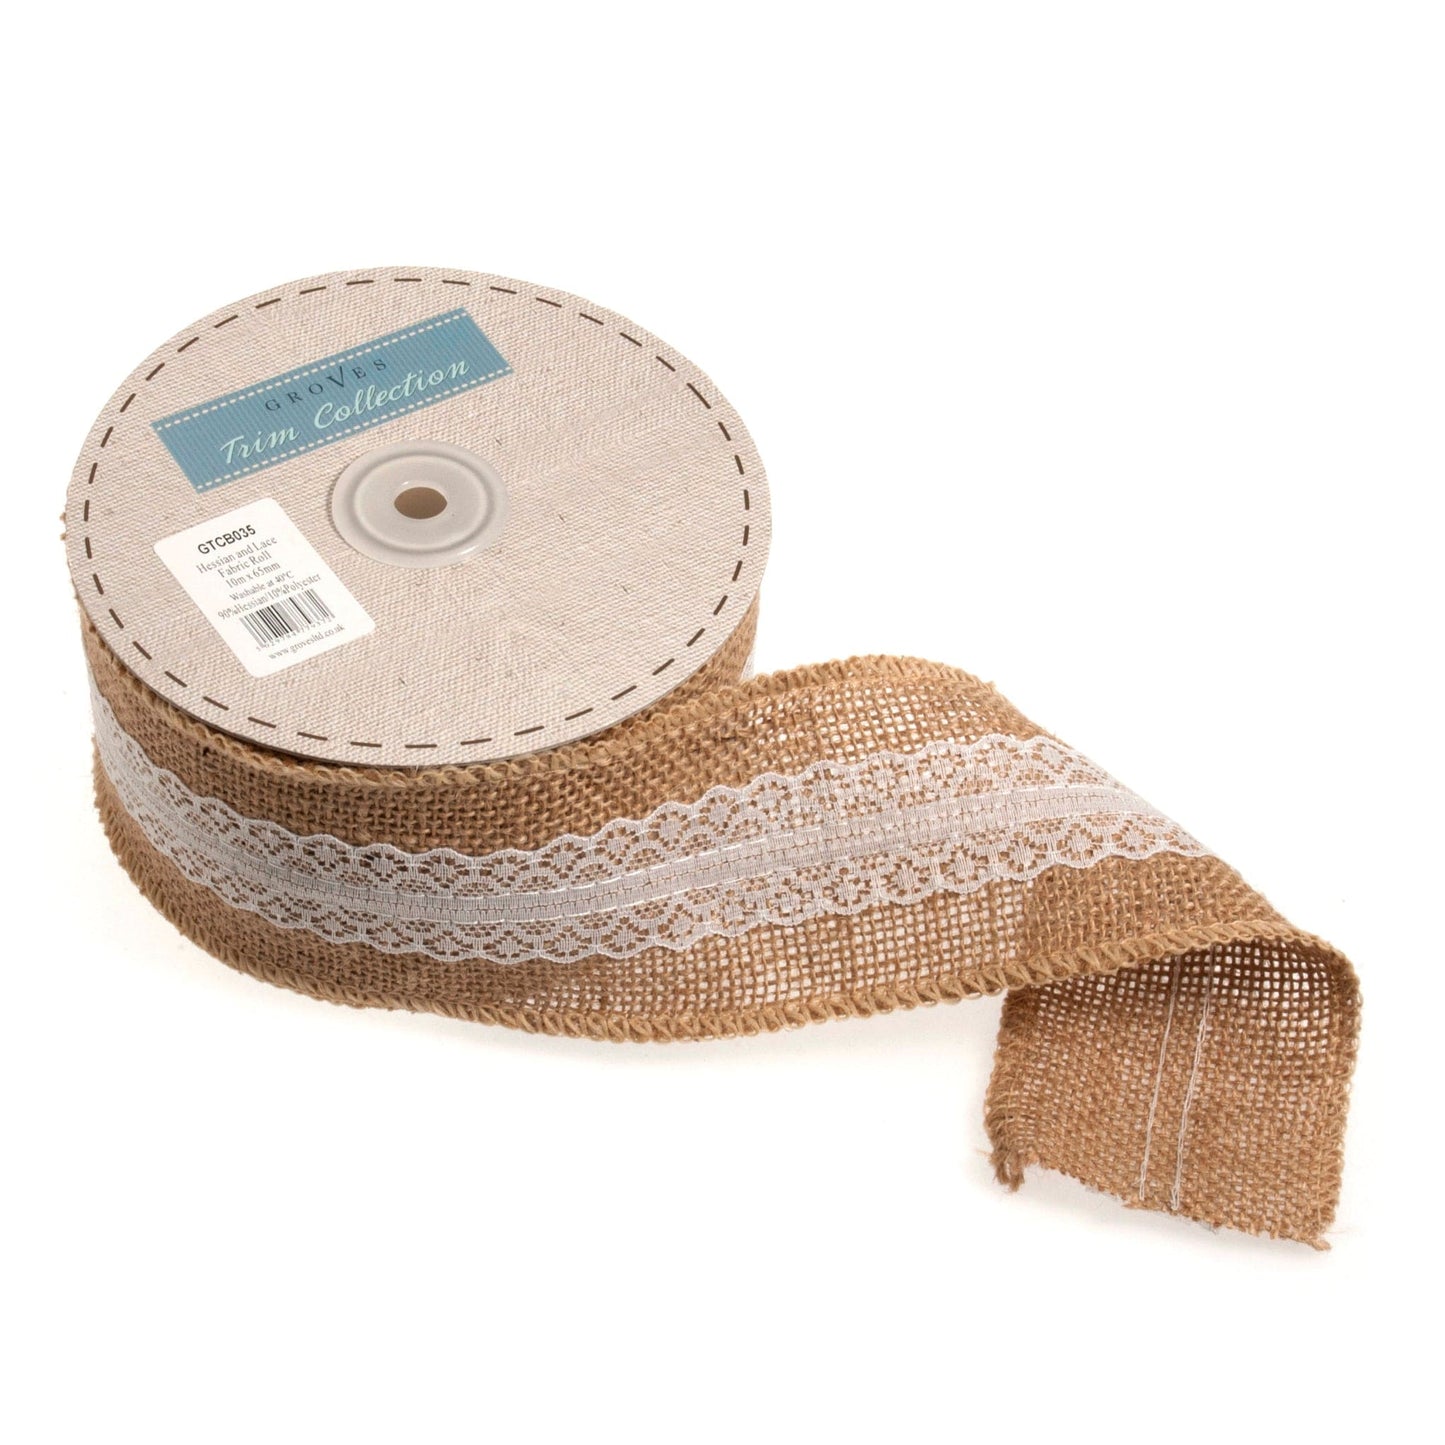 Lace Trimmed Hessian Tape Natural 65mm Wide Price Per Metre